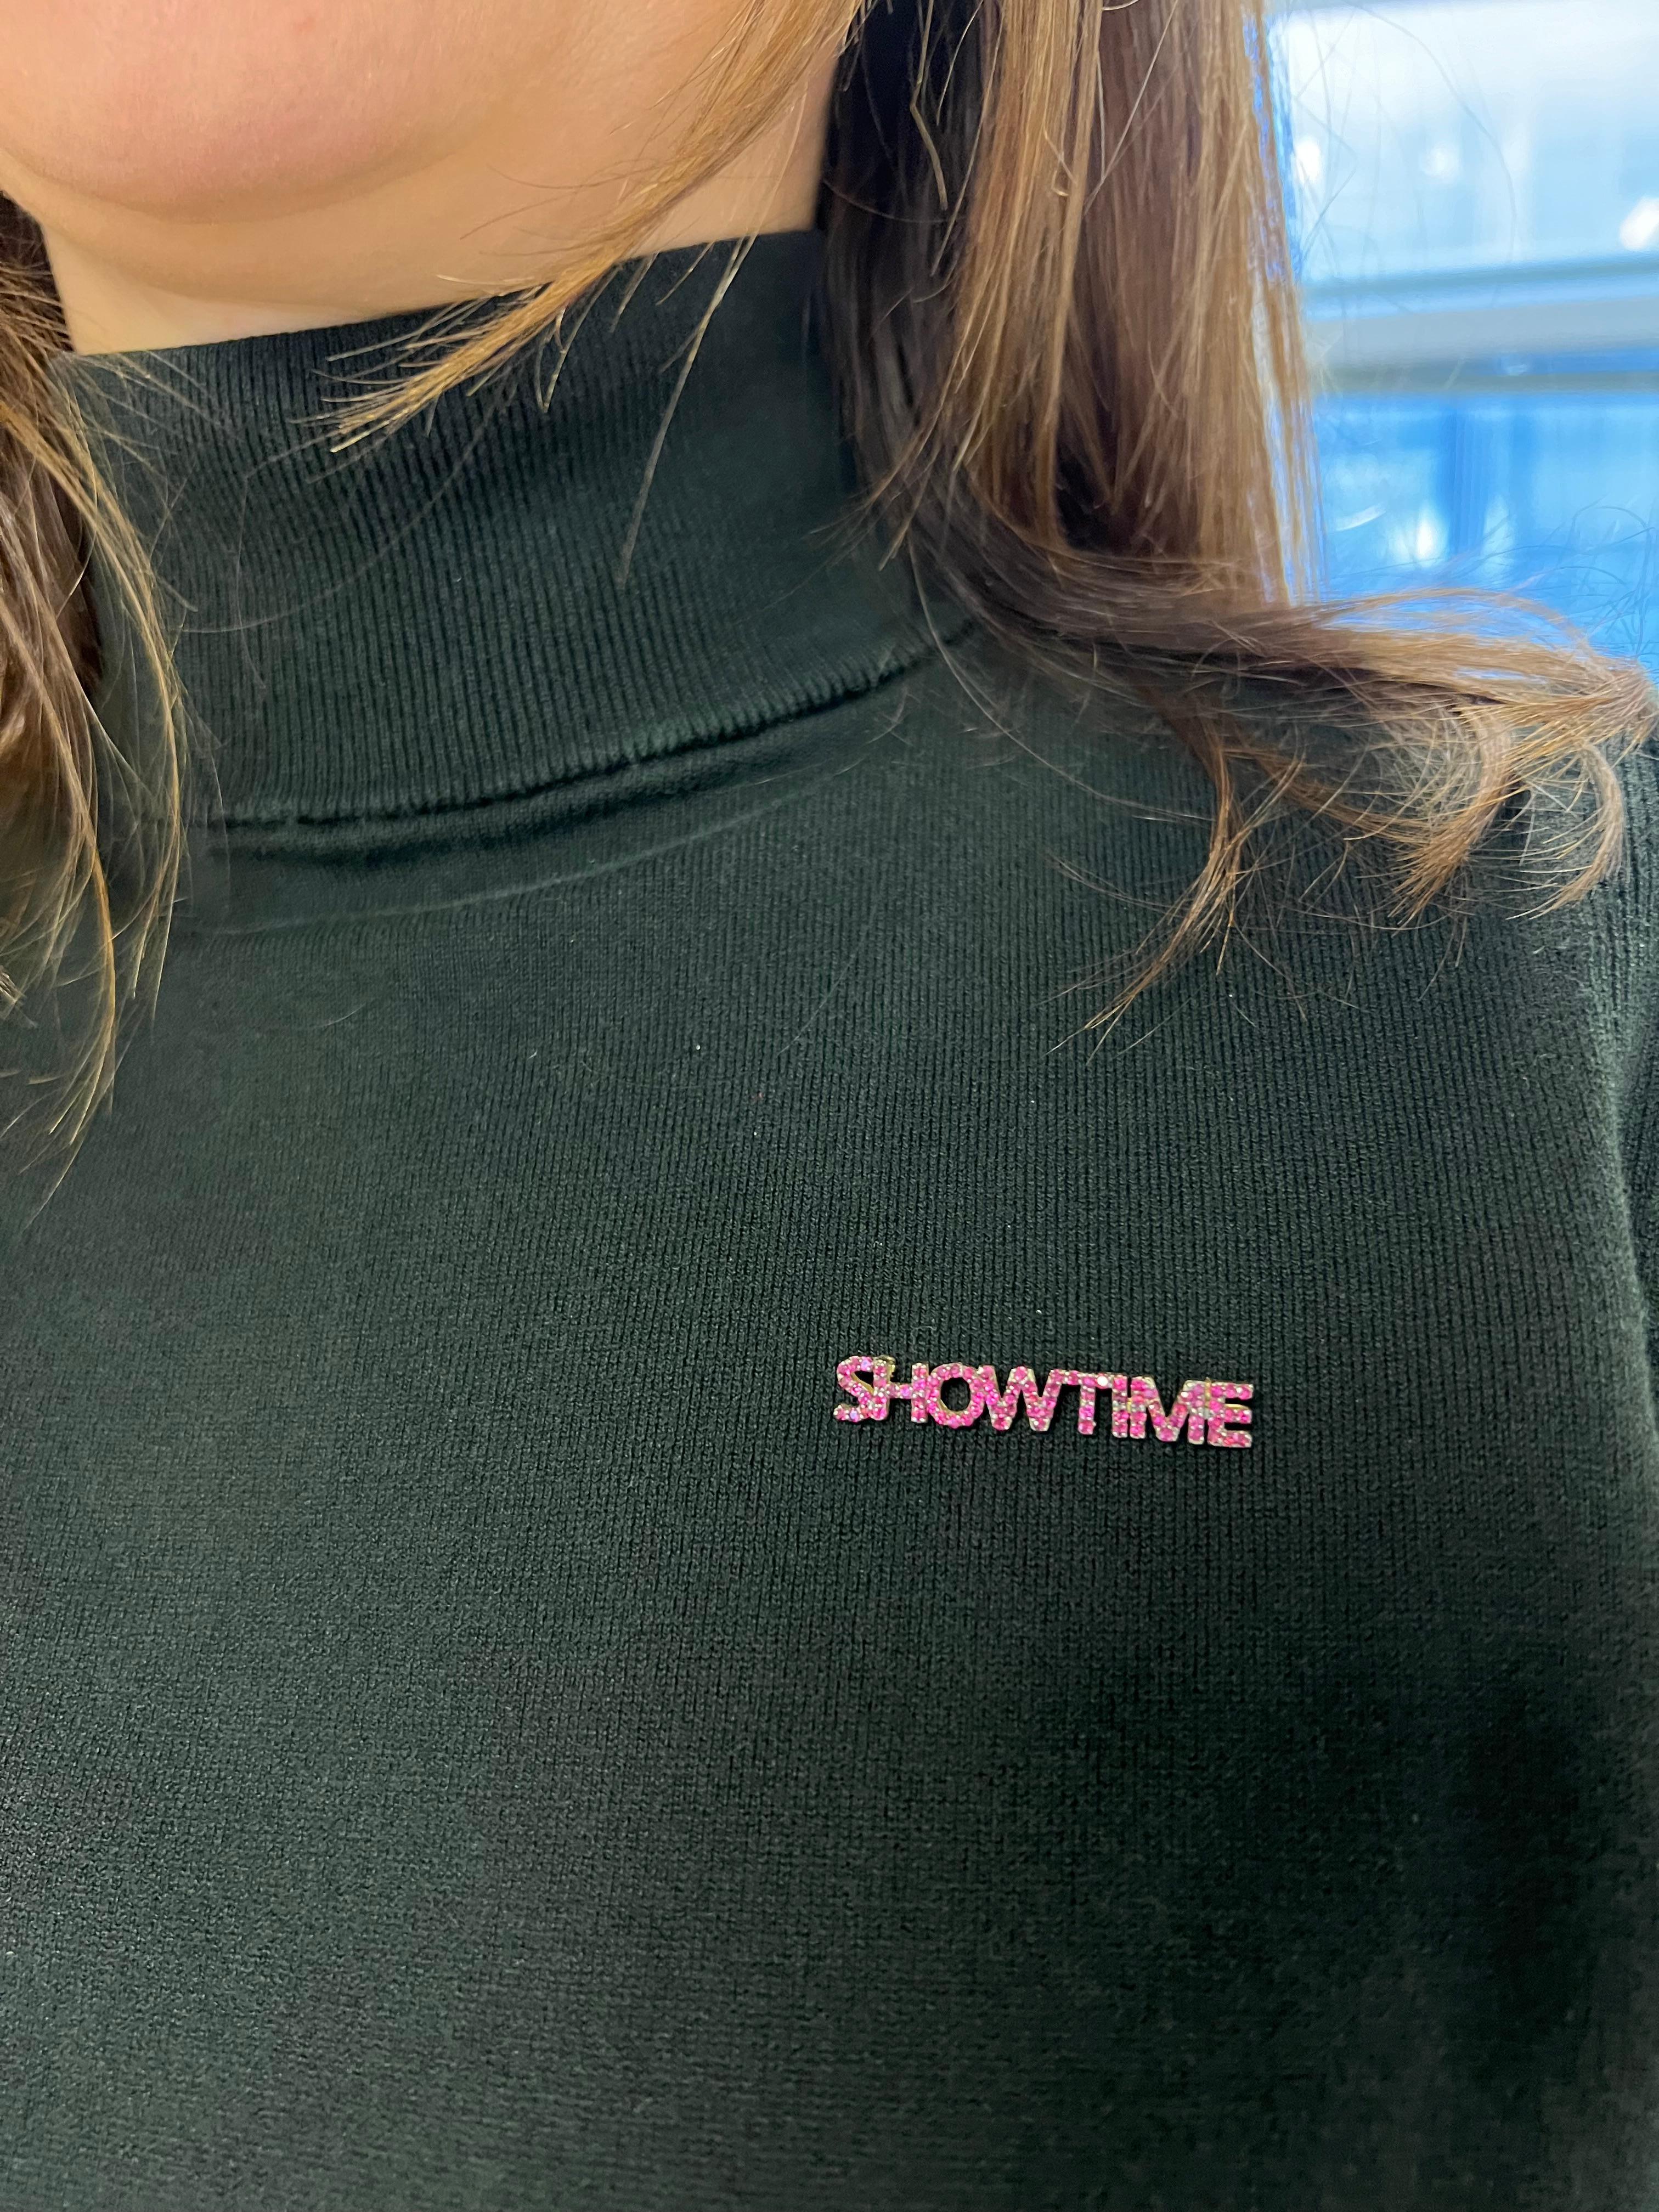 Introducing our SHOWTIME pin, a dazzling expression of luxury and flair in 18k yellow gold. This distinctive pin is adorned with 86 round rubies, each carefully selected to radiate a deep, alluring red hue. The captivating arrangement of these